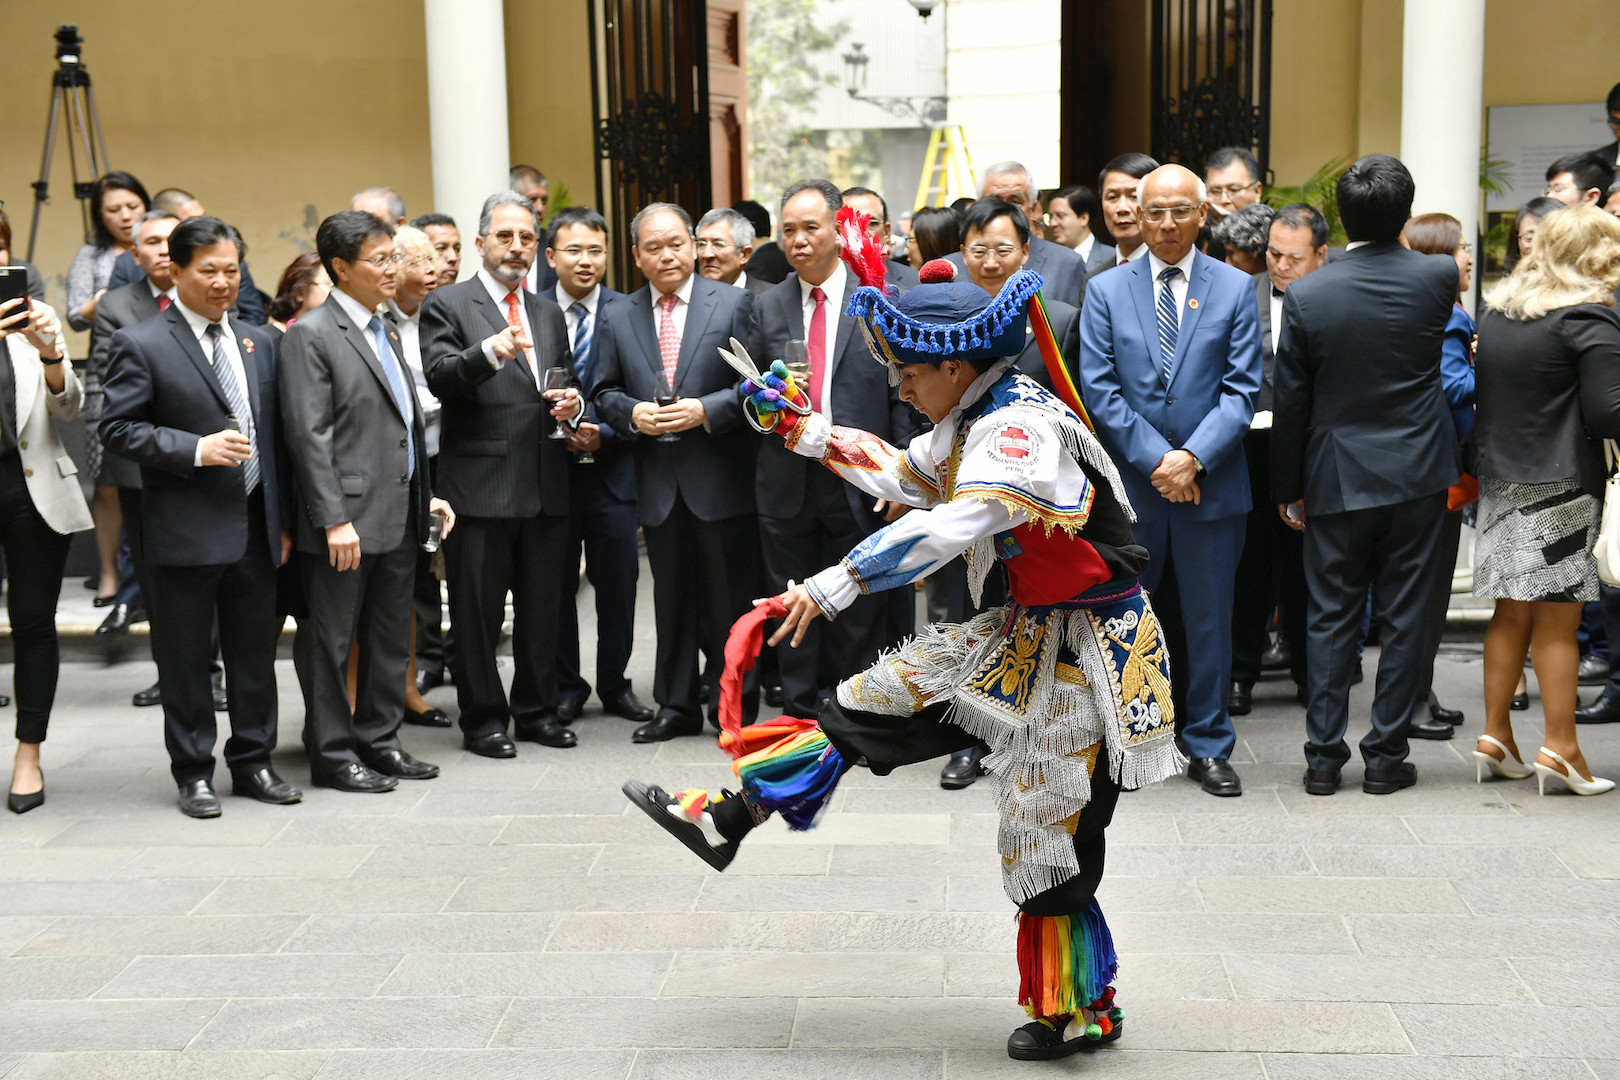 <p>A ceremony at the Chinese embassy in Lima commemorates 170 years of Chinese immigration in Peru. Today, NGOs are calling for Chinese investments to respect indigenous people&#8217;s right to prior consultation (image: <a href="https://www.flickr.com/photos/cancilleriadeperu/48904974462">Cancilleria del Peru</a>)</p>